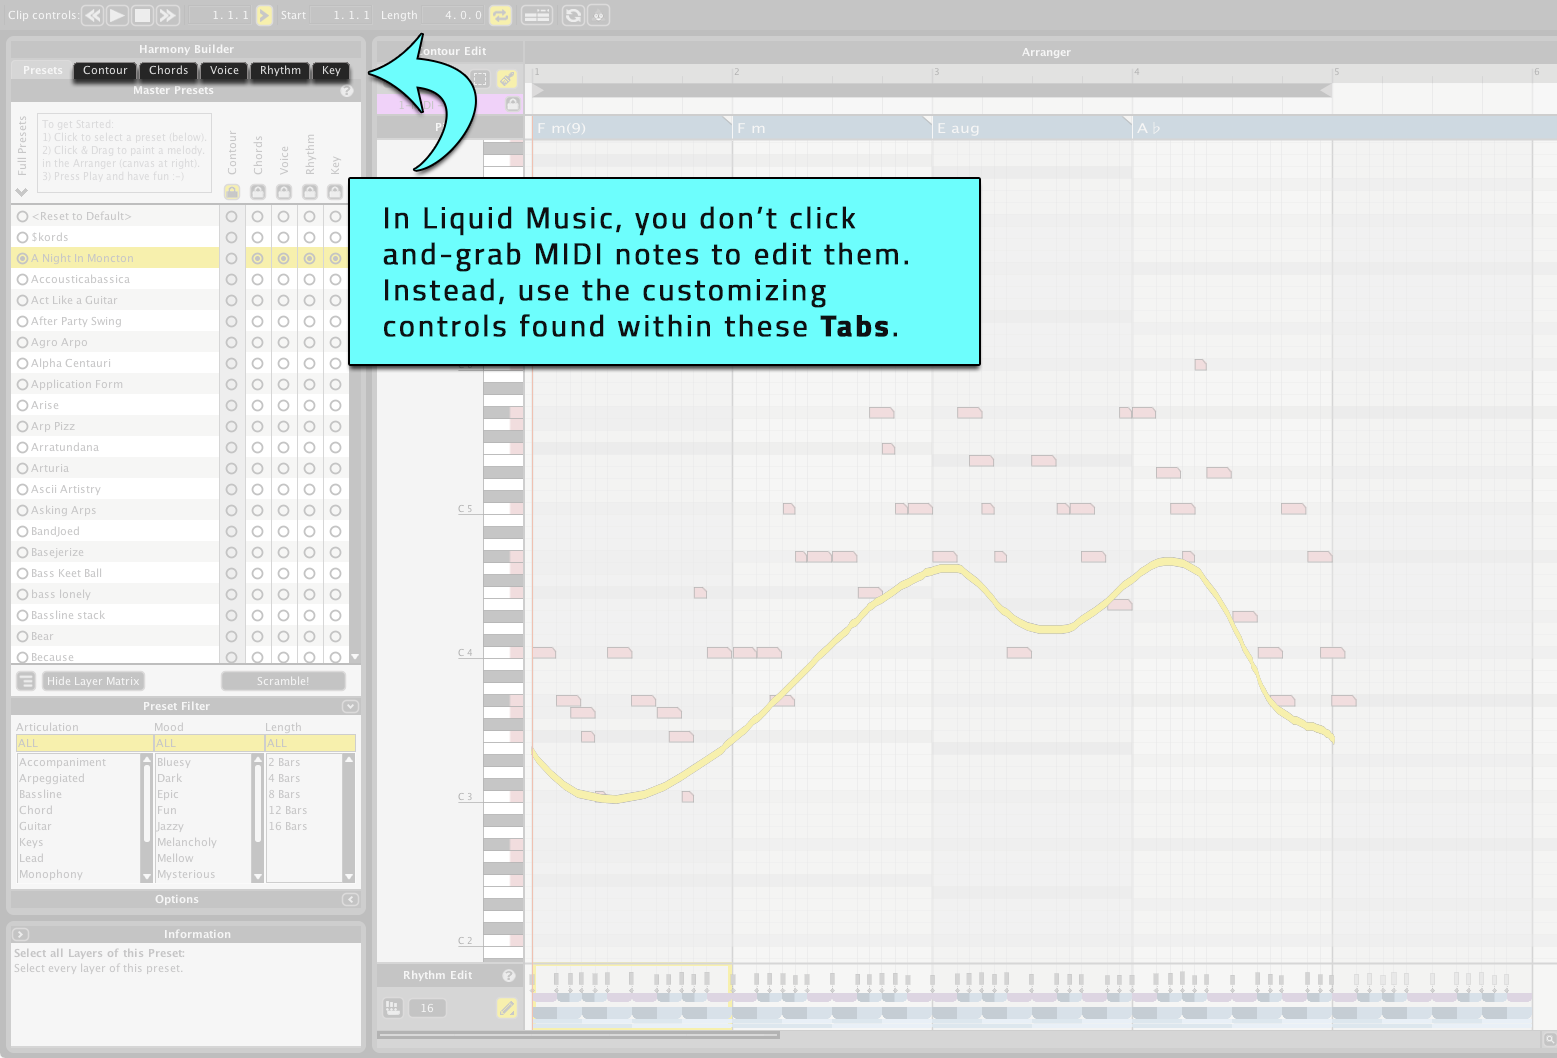 In Liquid Music, you don't click-and-grab MIDI notes to edit them. Instead, use the customizing controls found within these Tabs.